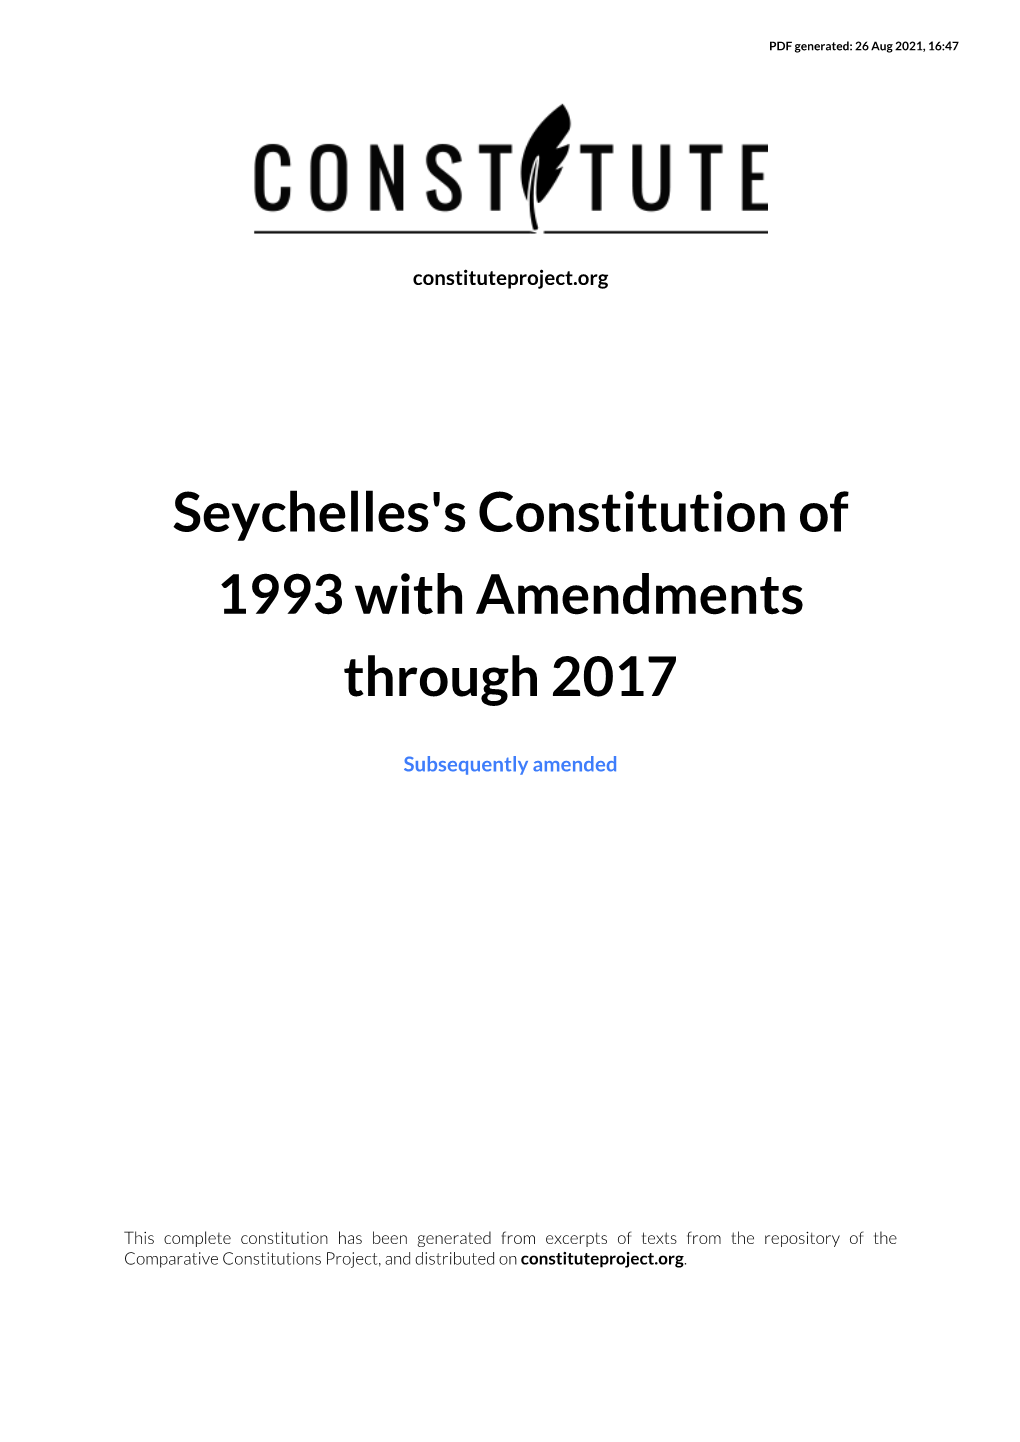 Seychelles's Constitution of 1993 with Amendments Through 2017